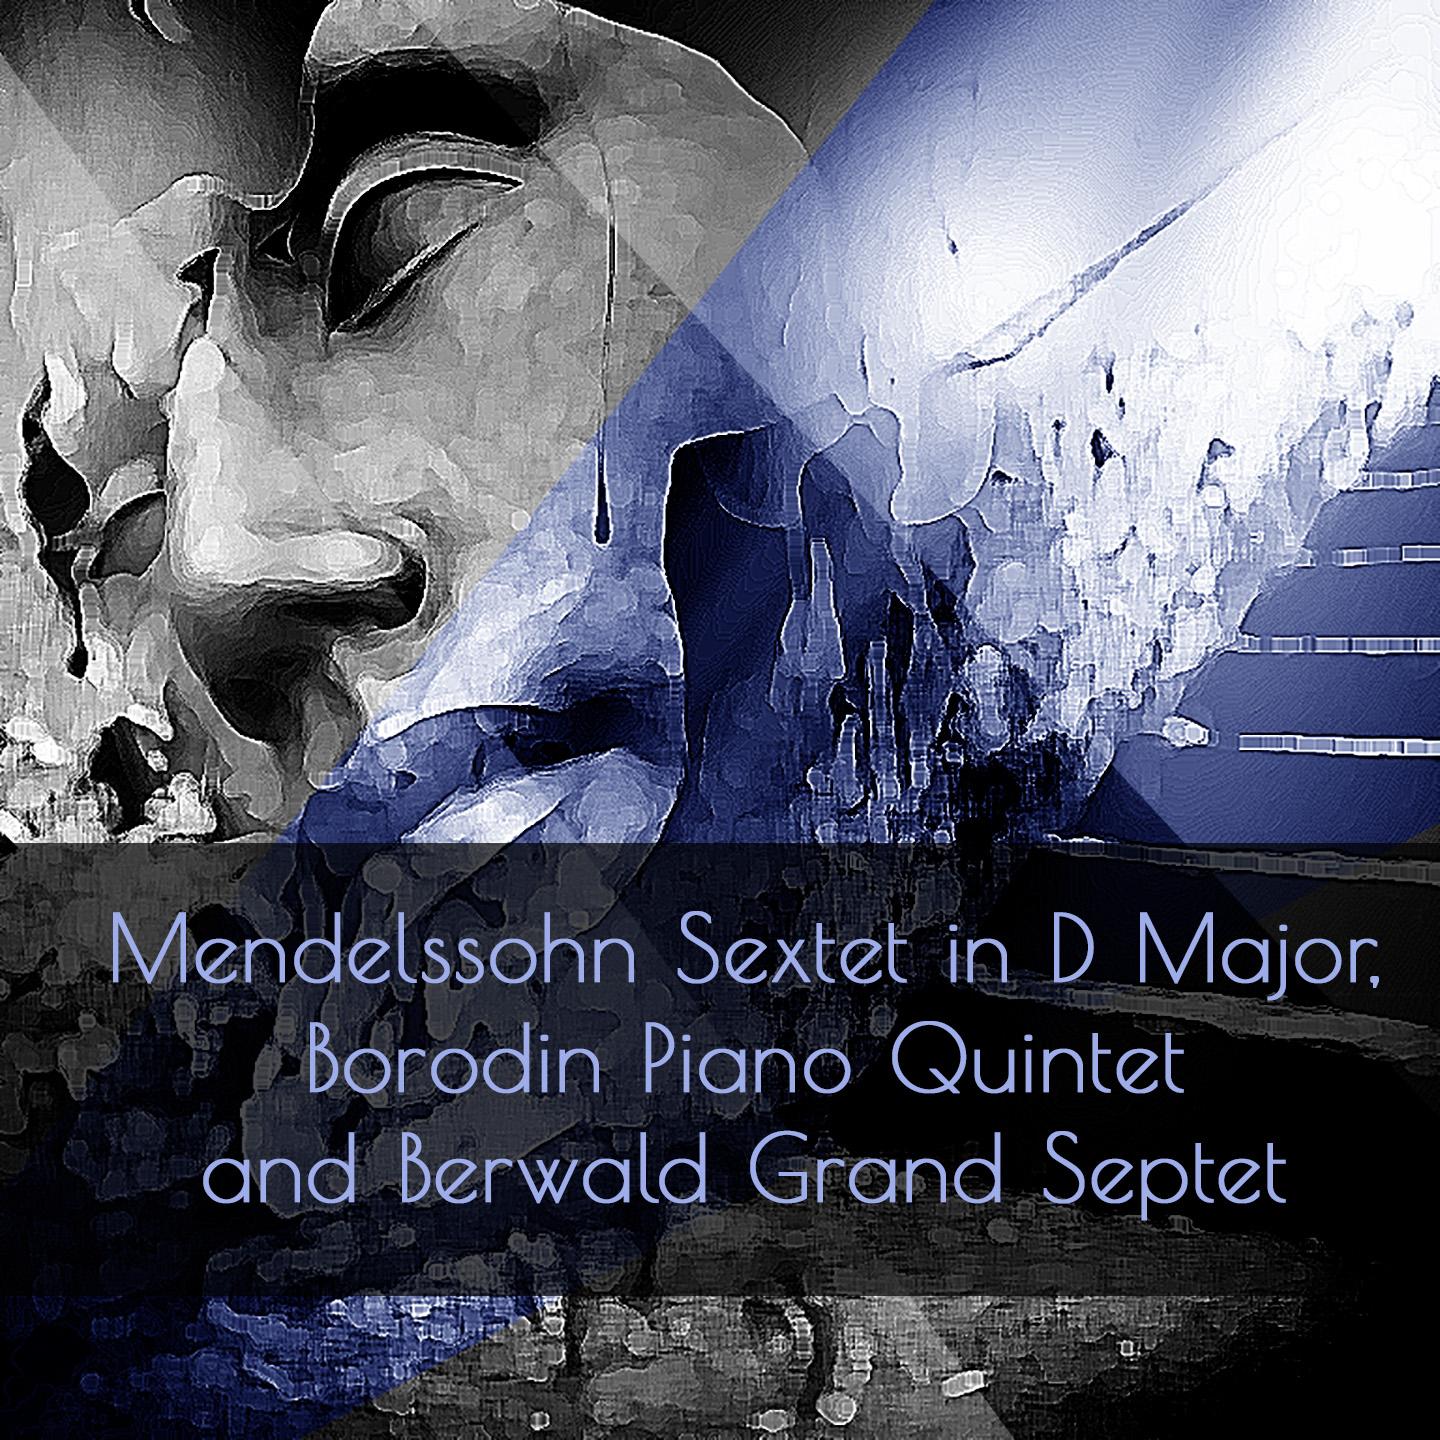 Sextet for Violin, Violas, Cello, Double Bass and Piano in D Major, Op. 110: I. Allegro vivace